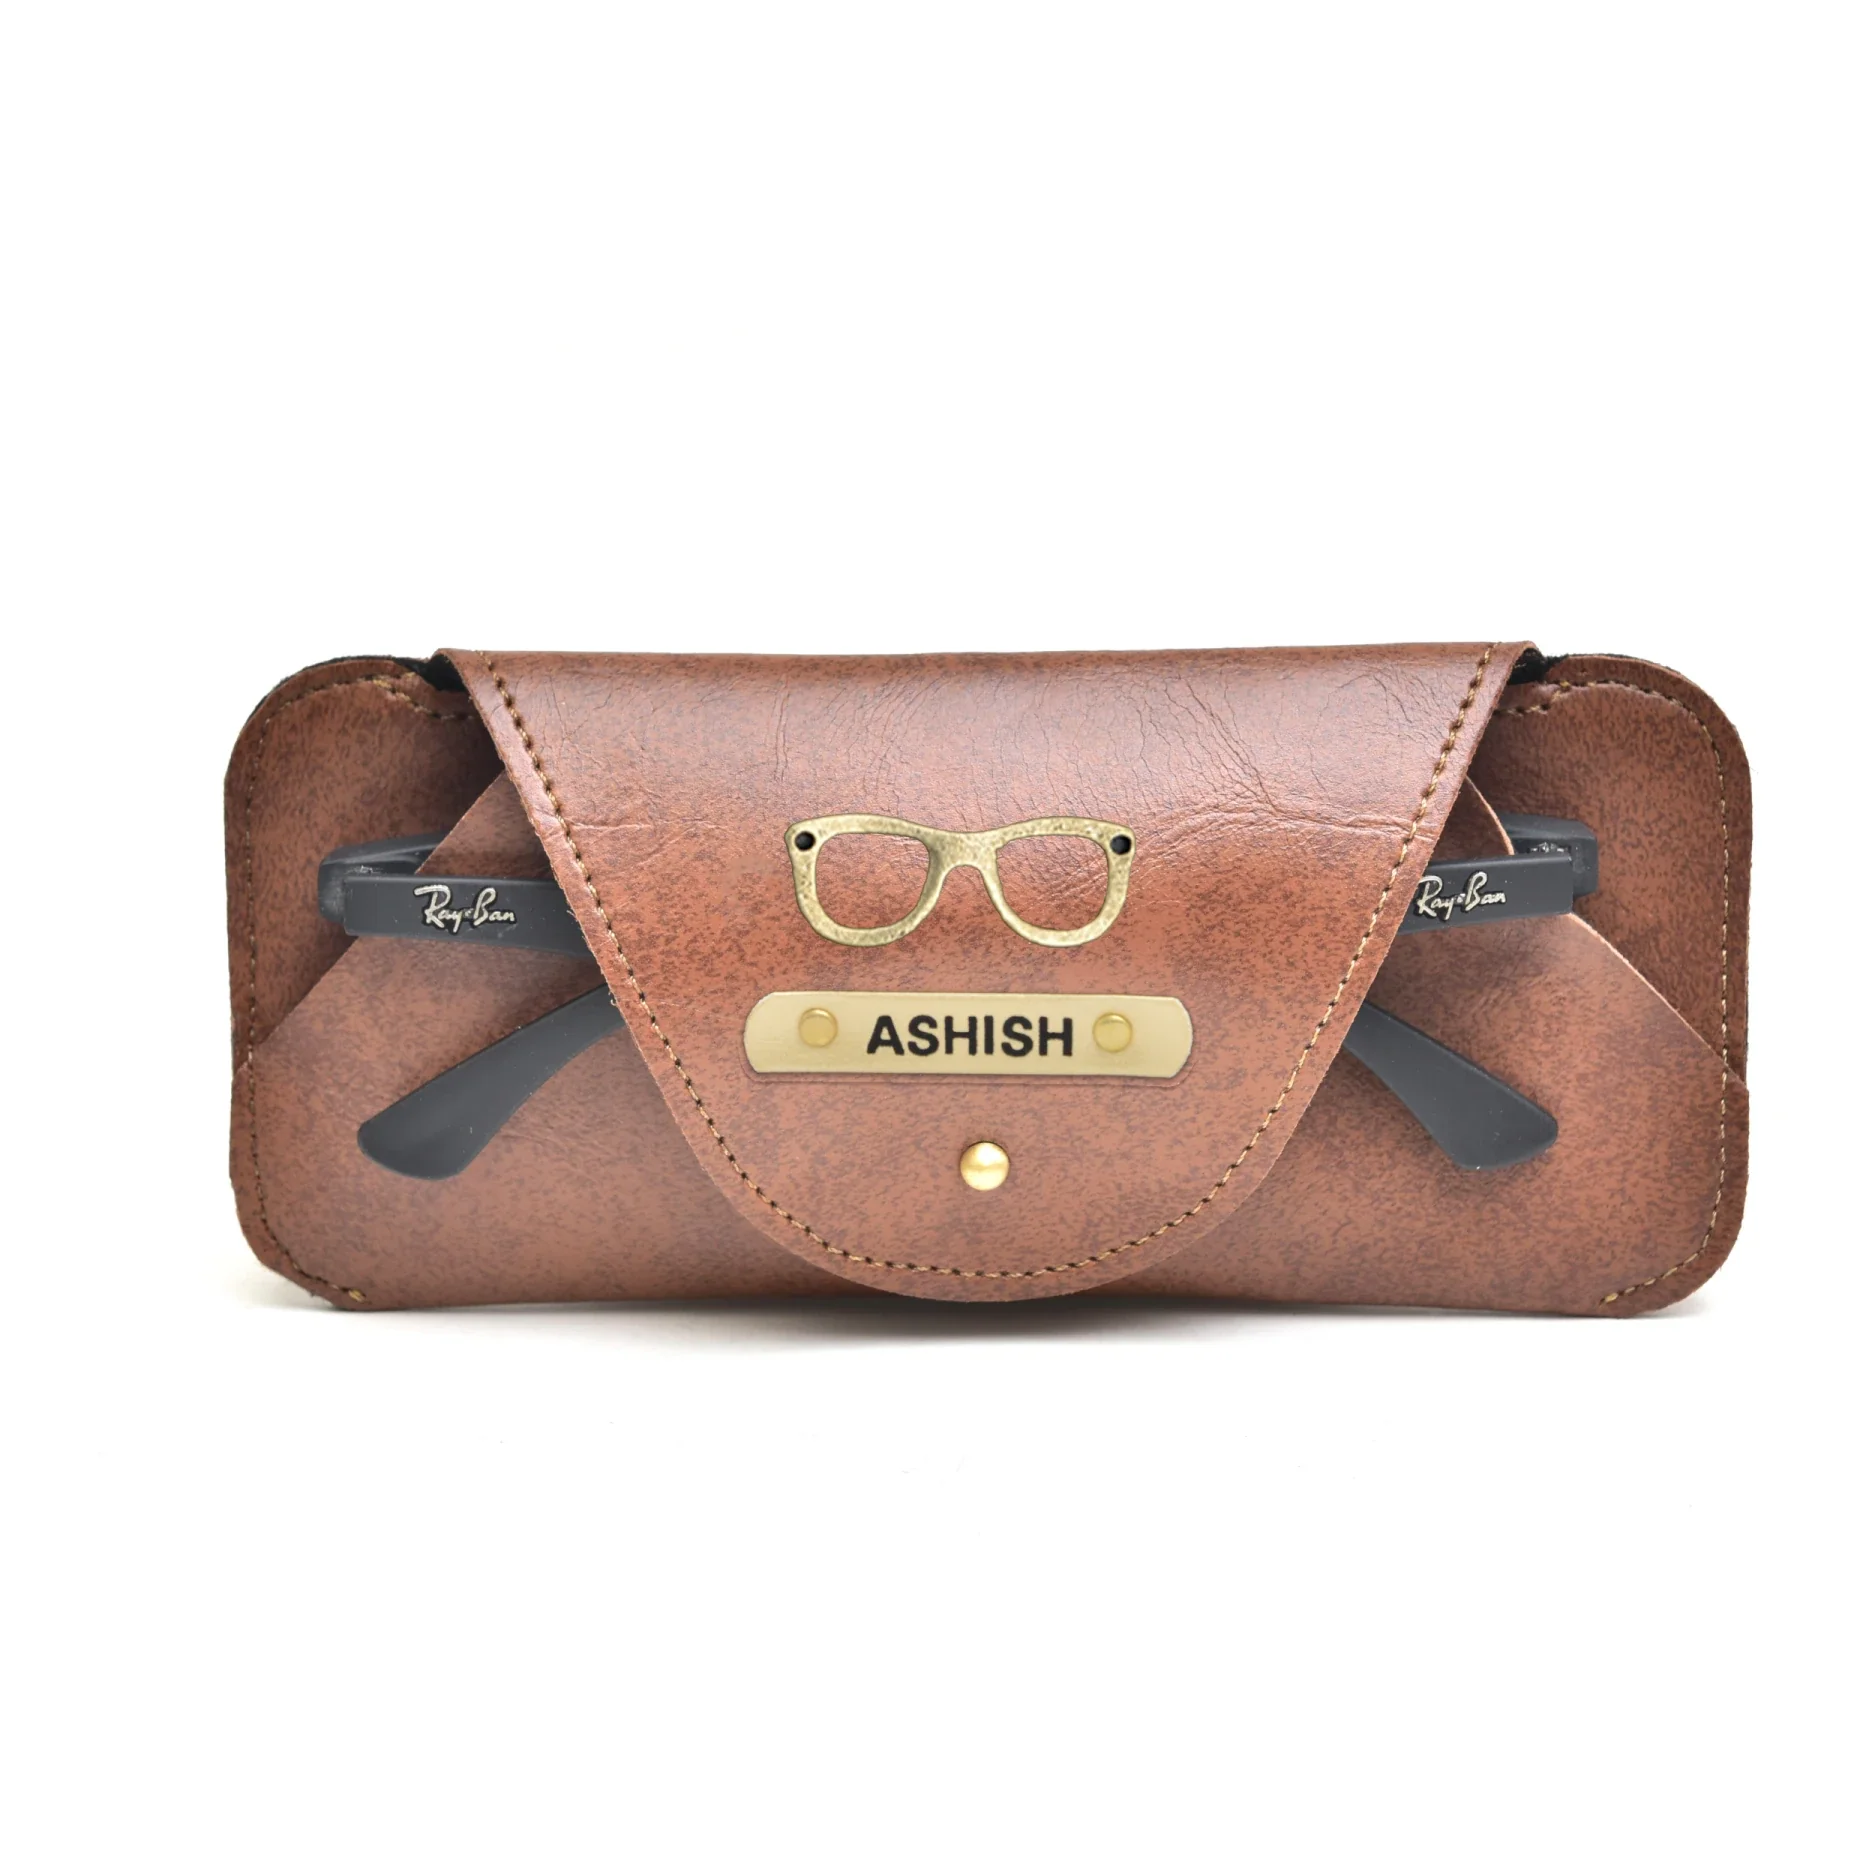 Carry your eyewear in style with this custom-made case.